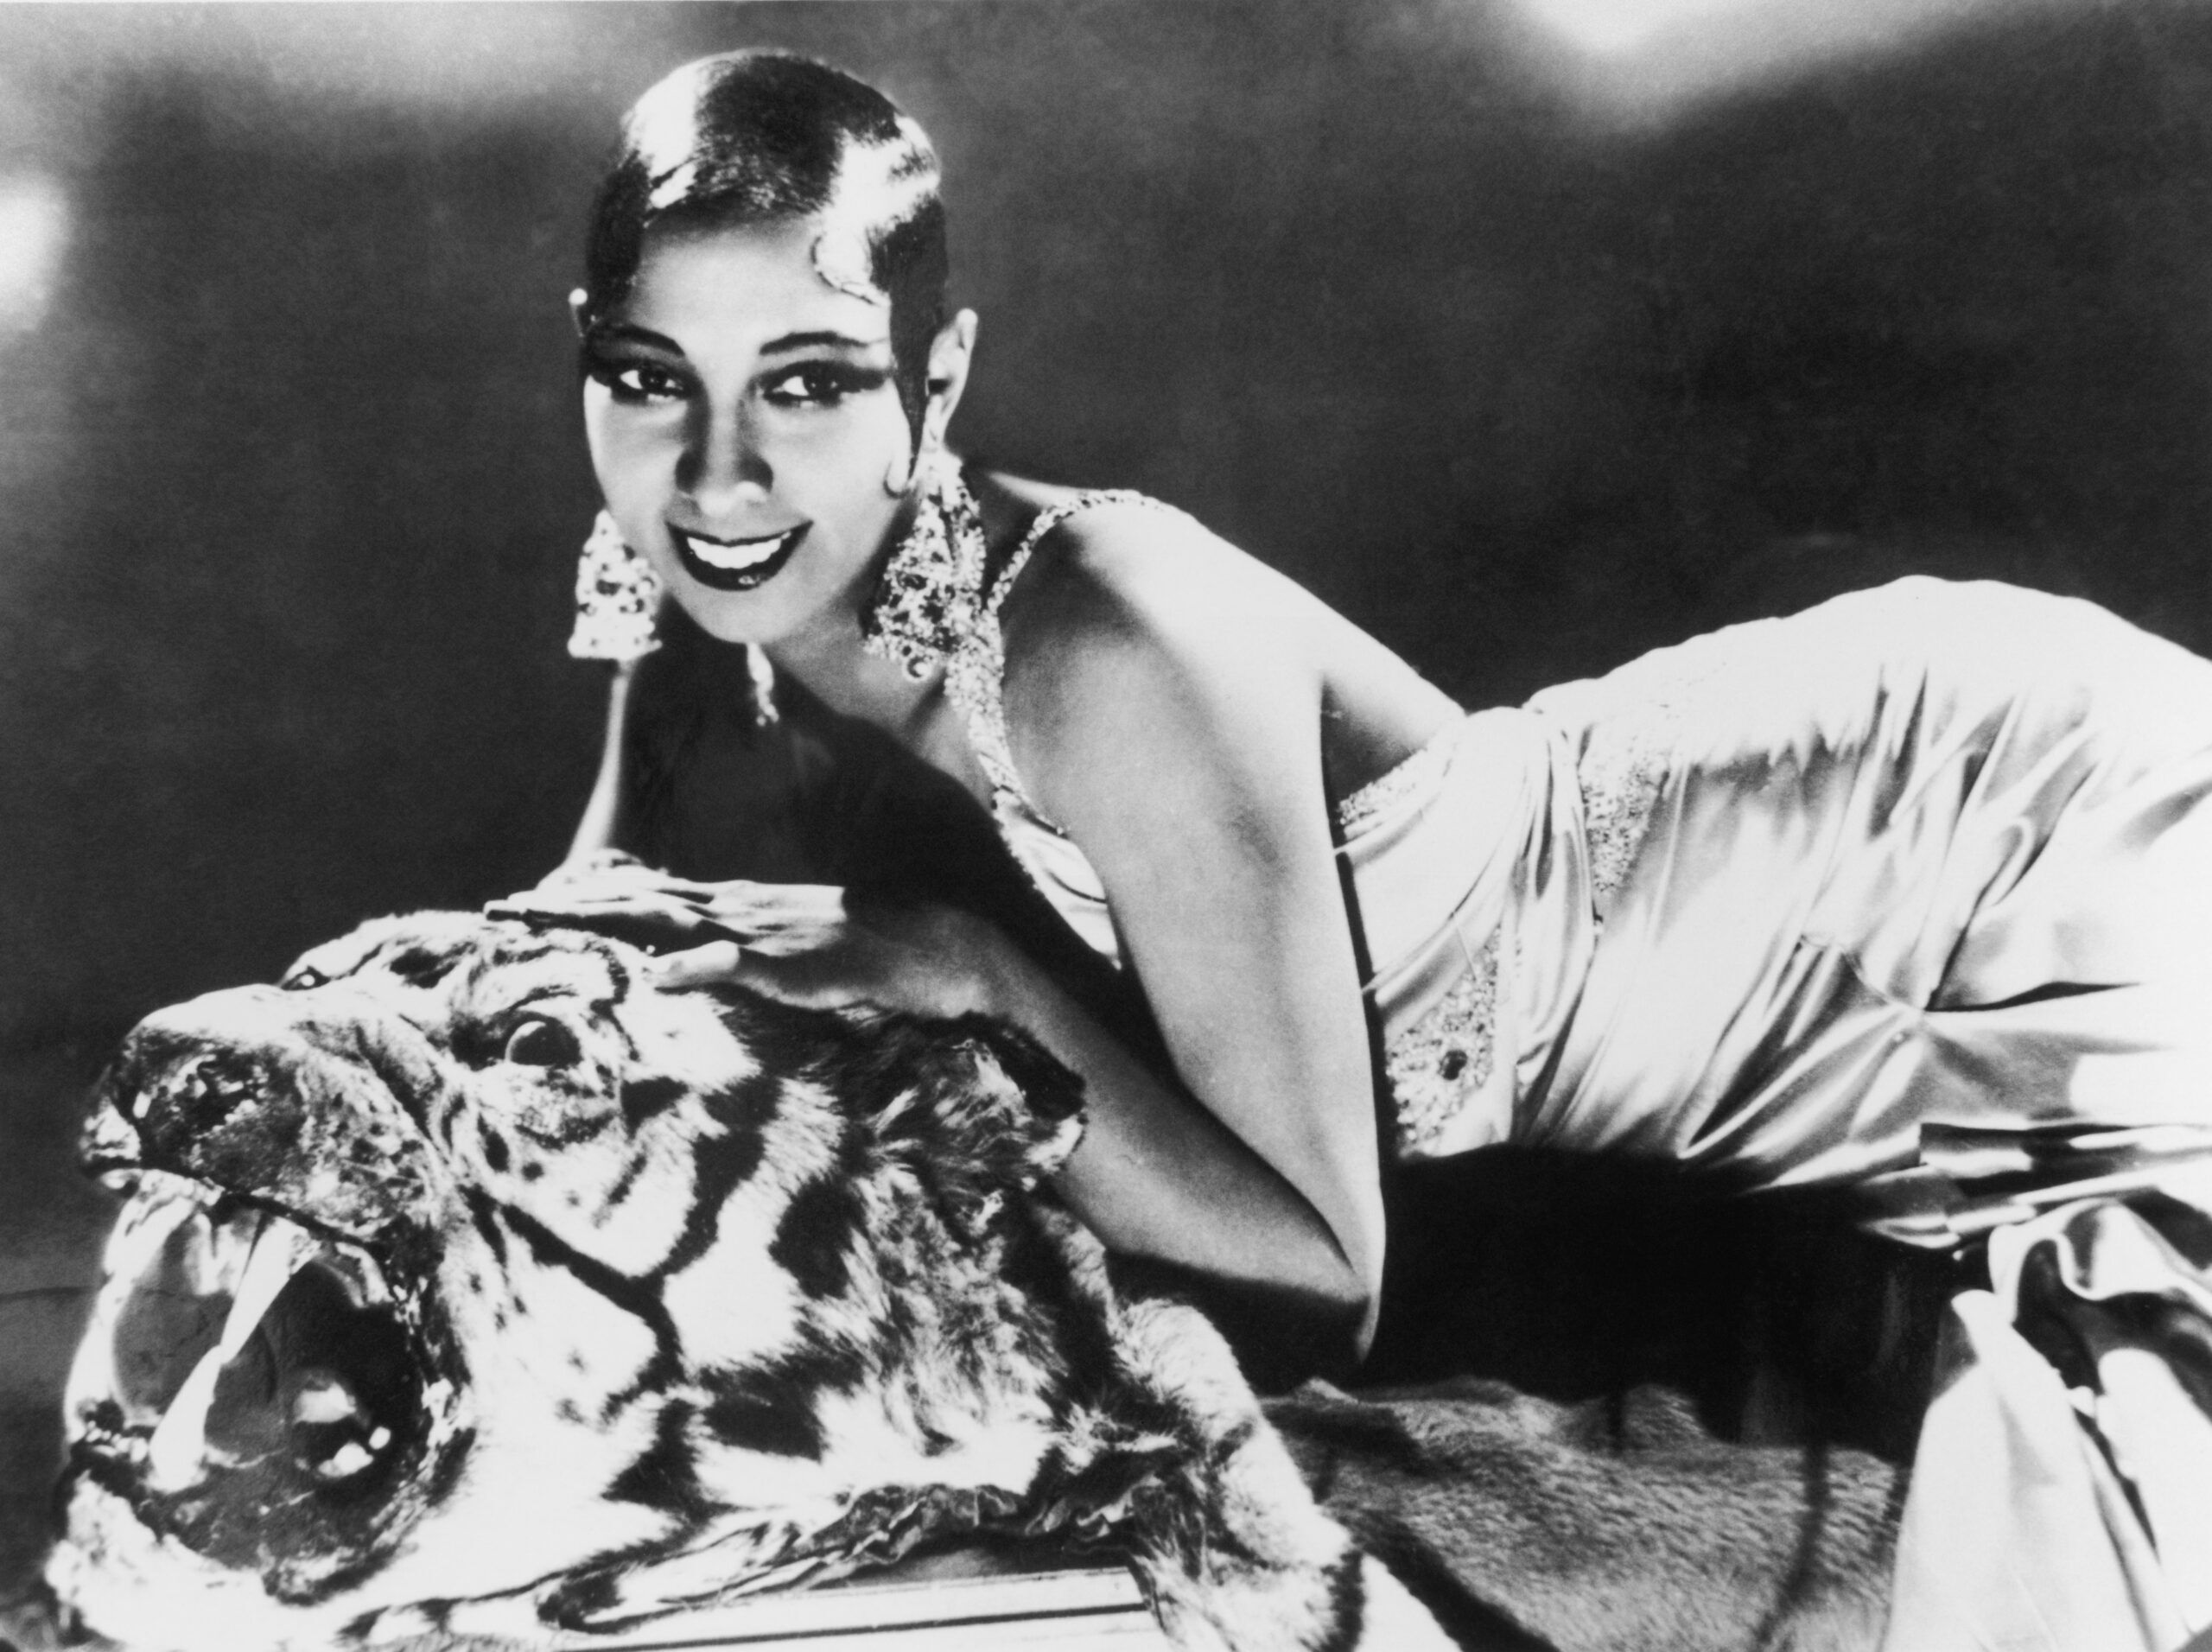 circa 1925: Portrait of American-born singer and dancer Josephine Baker (1906 - 1975) lying on a tiger rug in a silk evening gown and diamond earrings. (Photo by Hulton Archive/Getty Images)